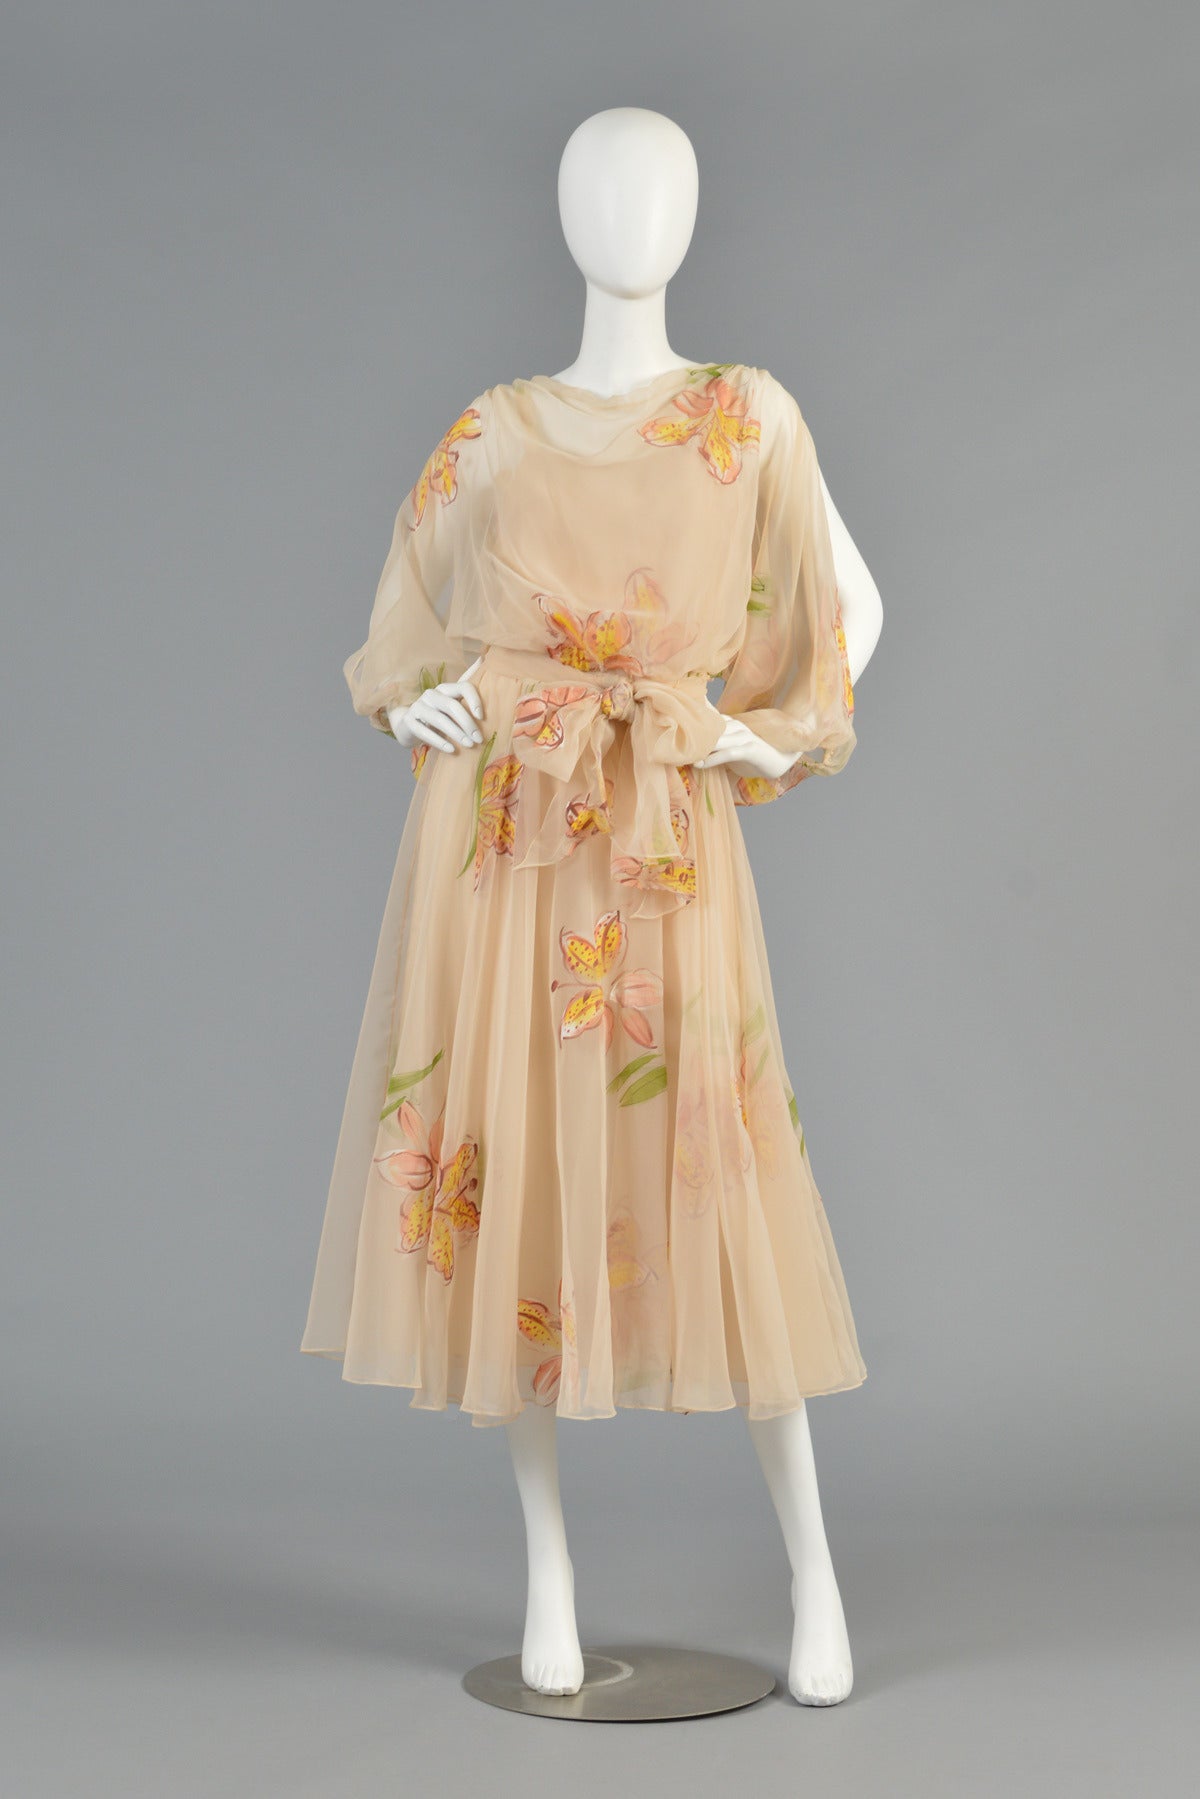 Beautiful 1970's pale peachy-nude chiffon dress by Mignon. An amazing find and perfect for all of your spring and summer engagements! Sheer chiffon body with high draped neck, nipped waist, full skirt and billowing open sleeves. Lovely reverse